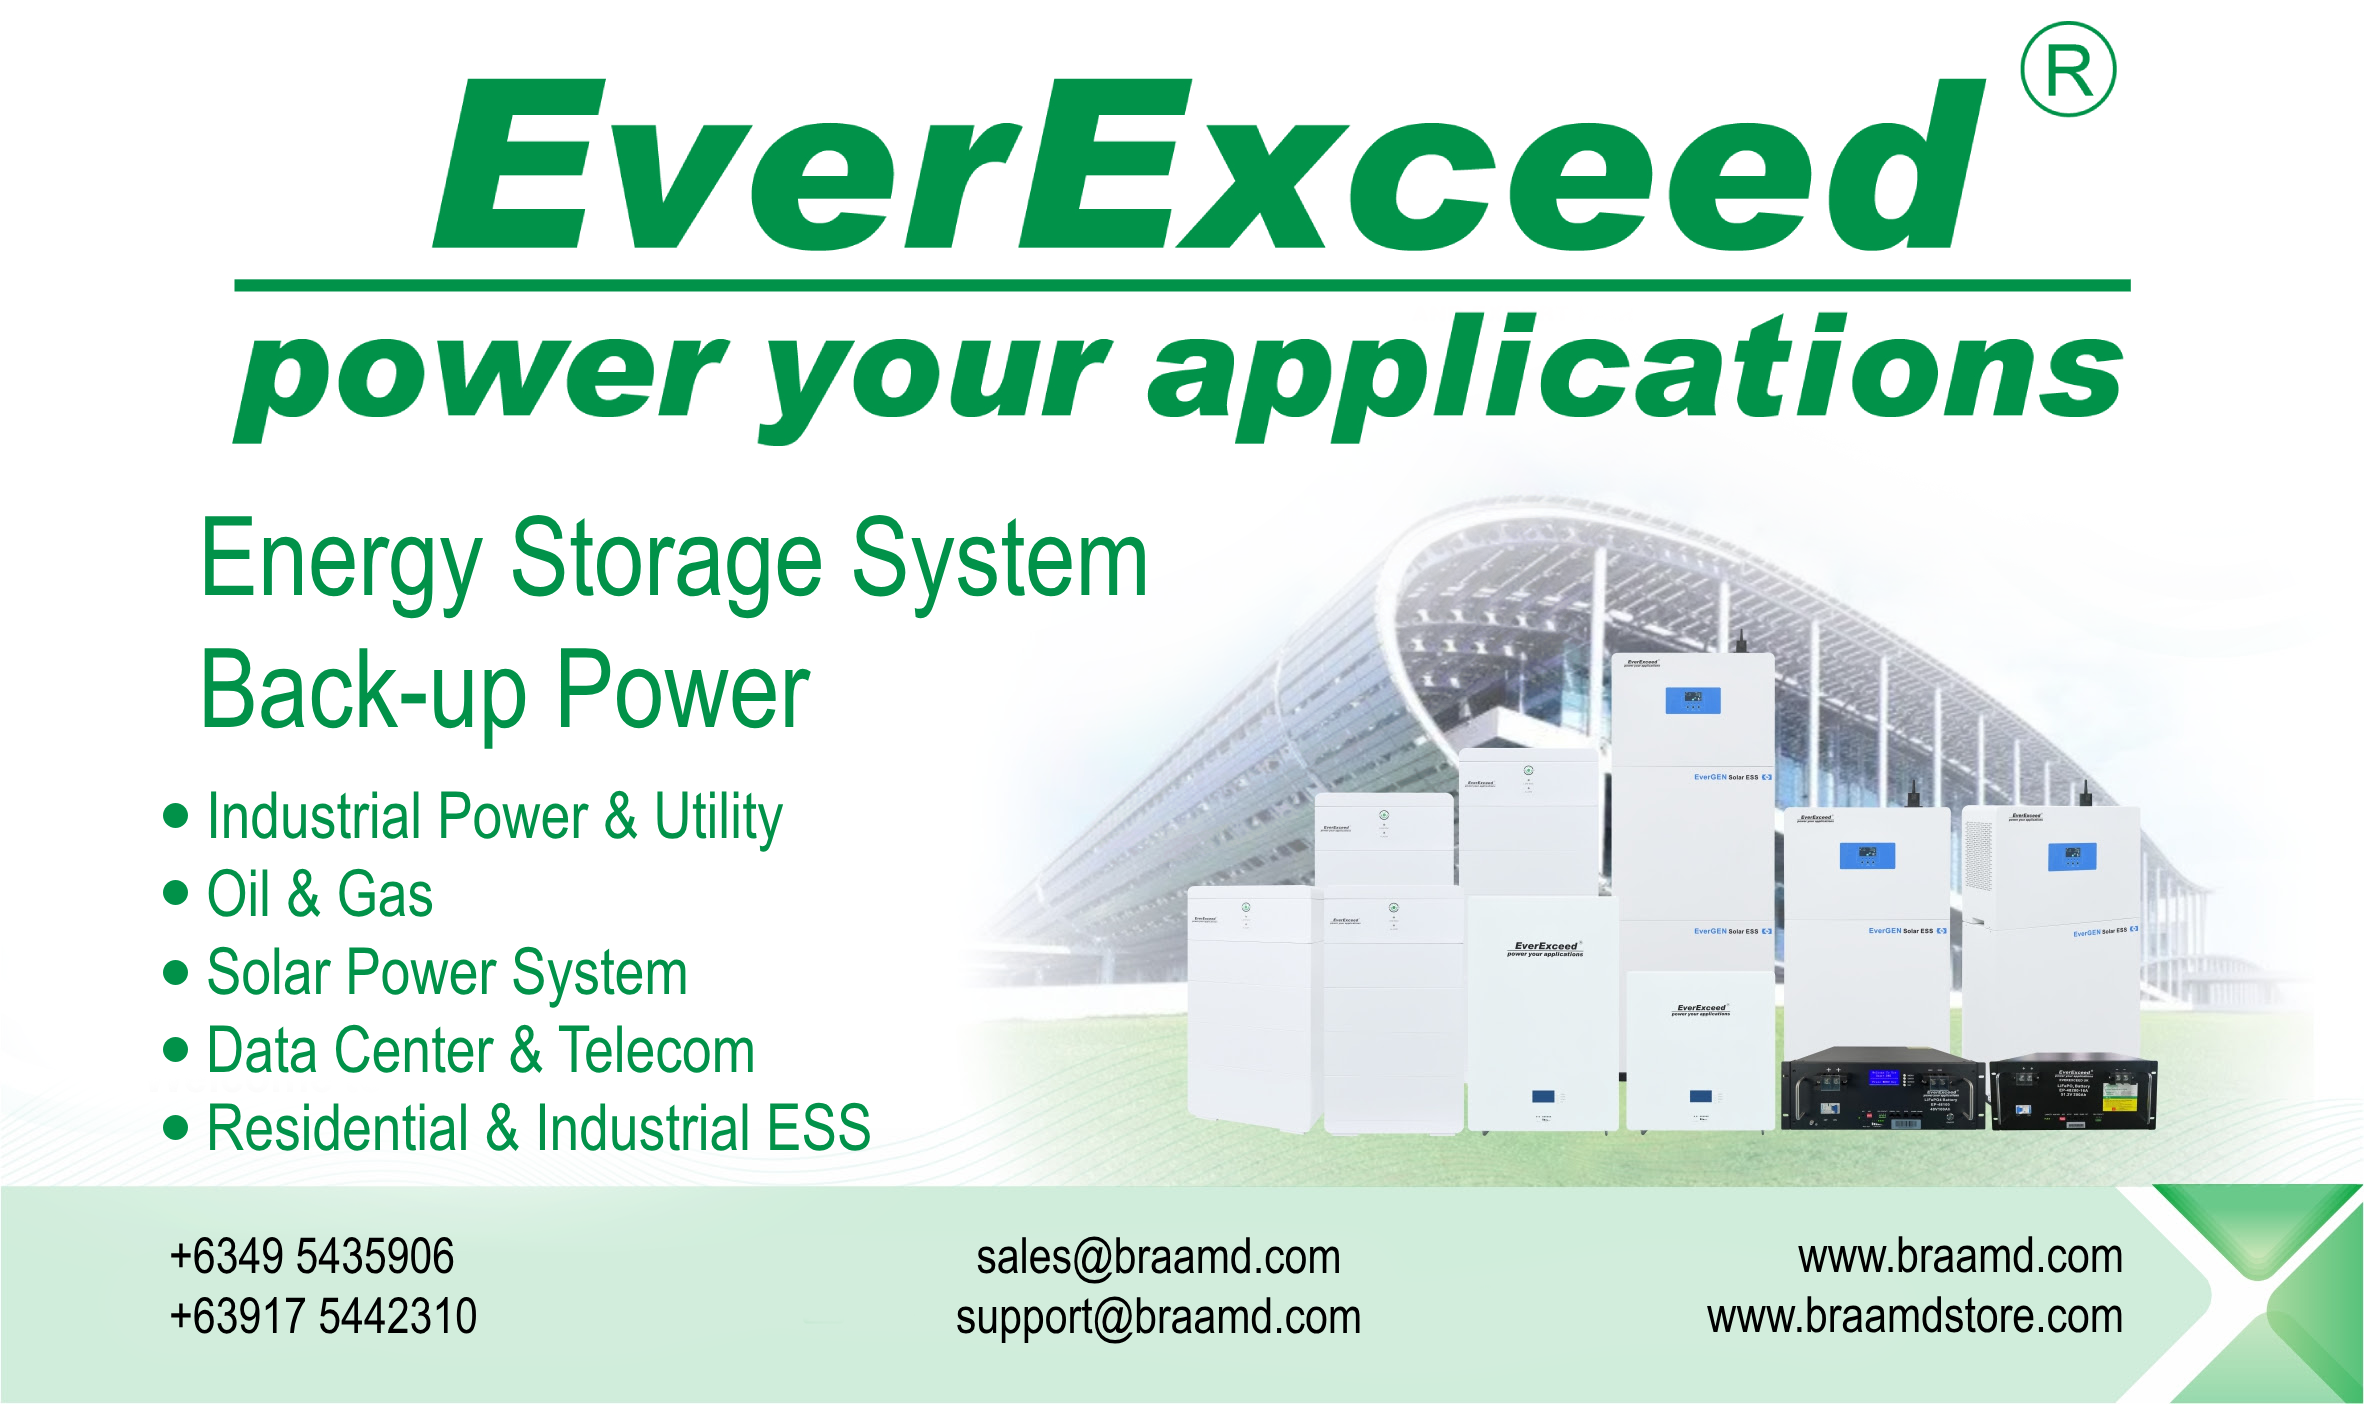 EverExceed Energy Storage System & Back-up Power